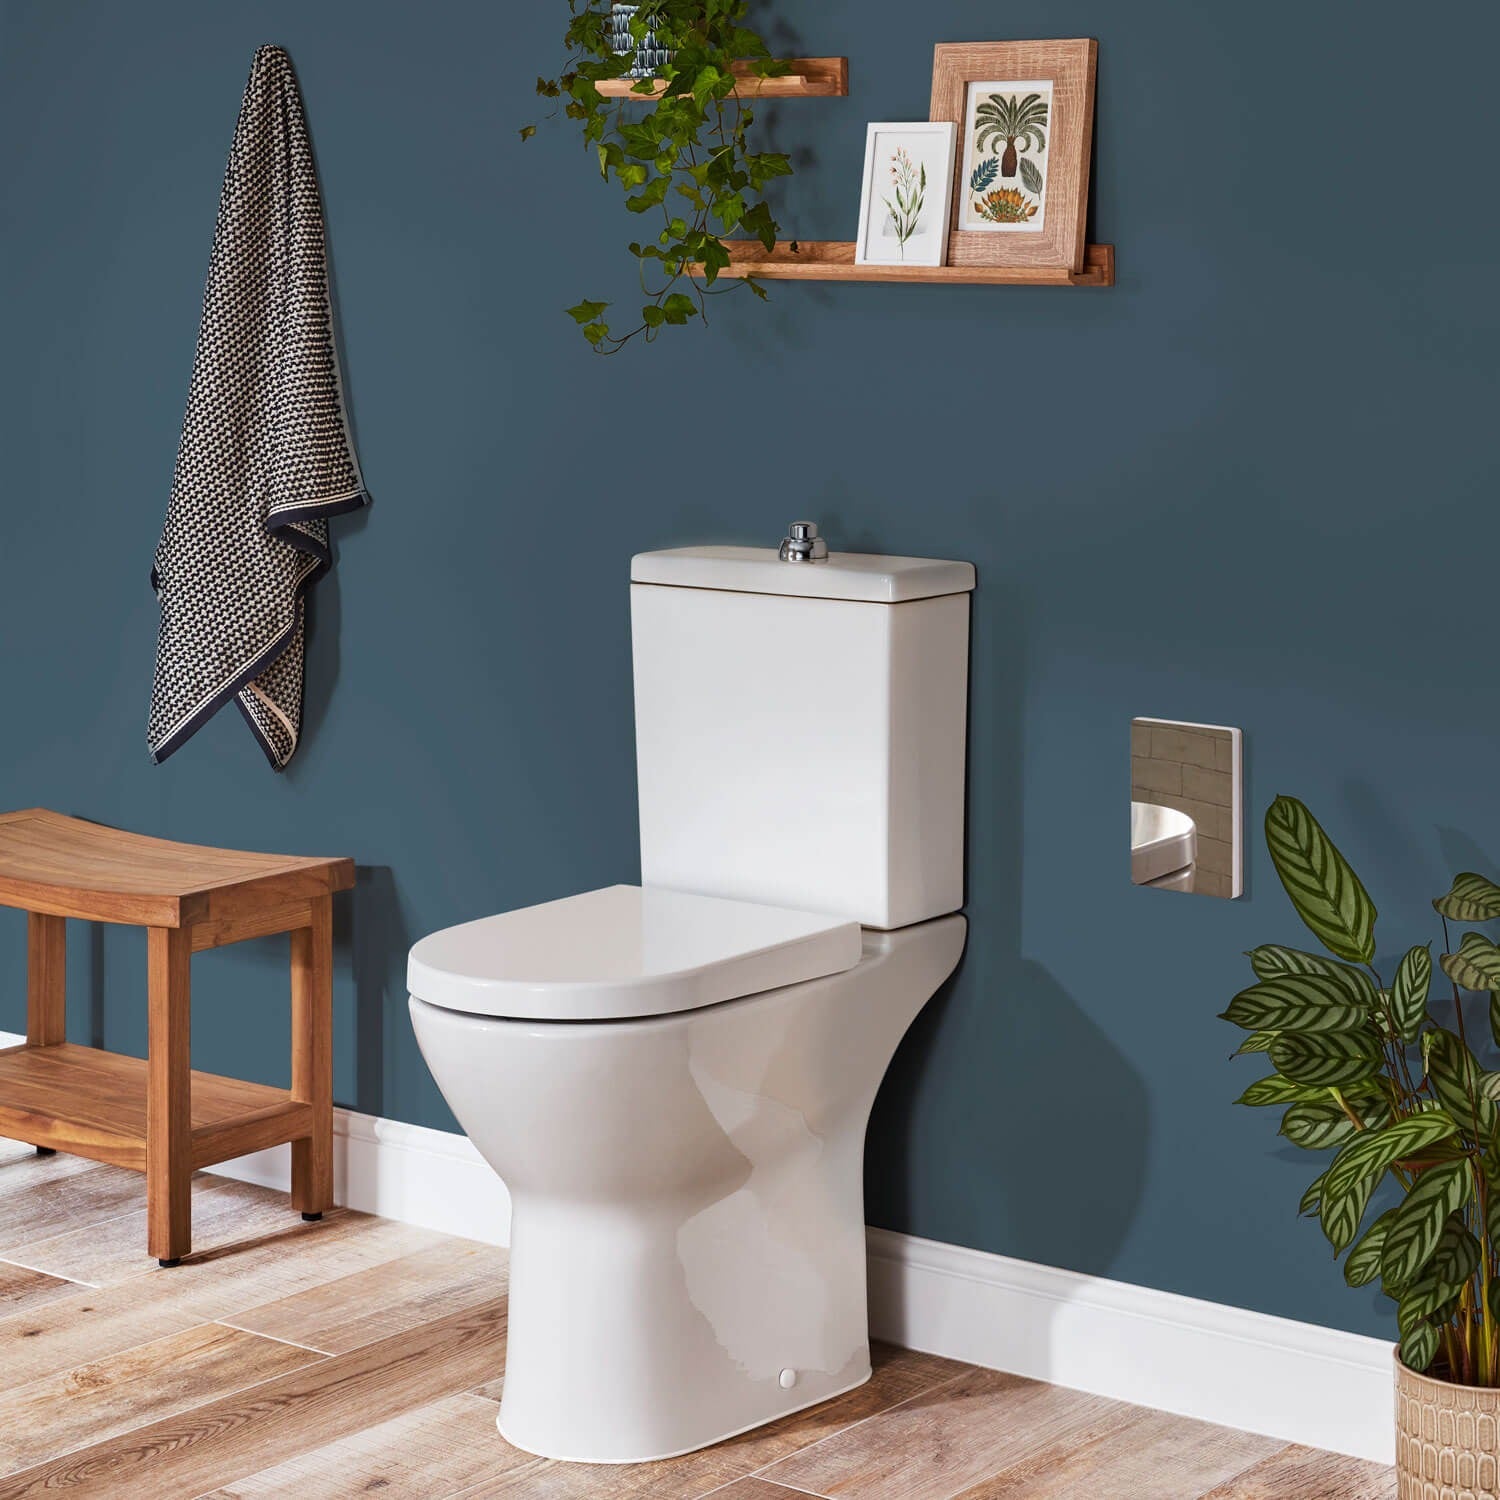 Accessible Toilets how-to guide